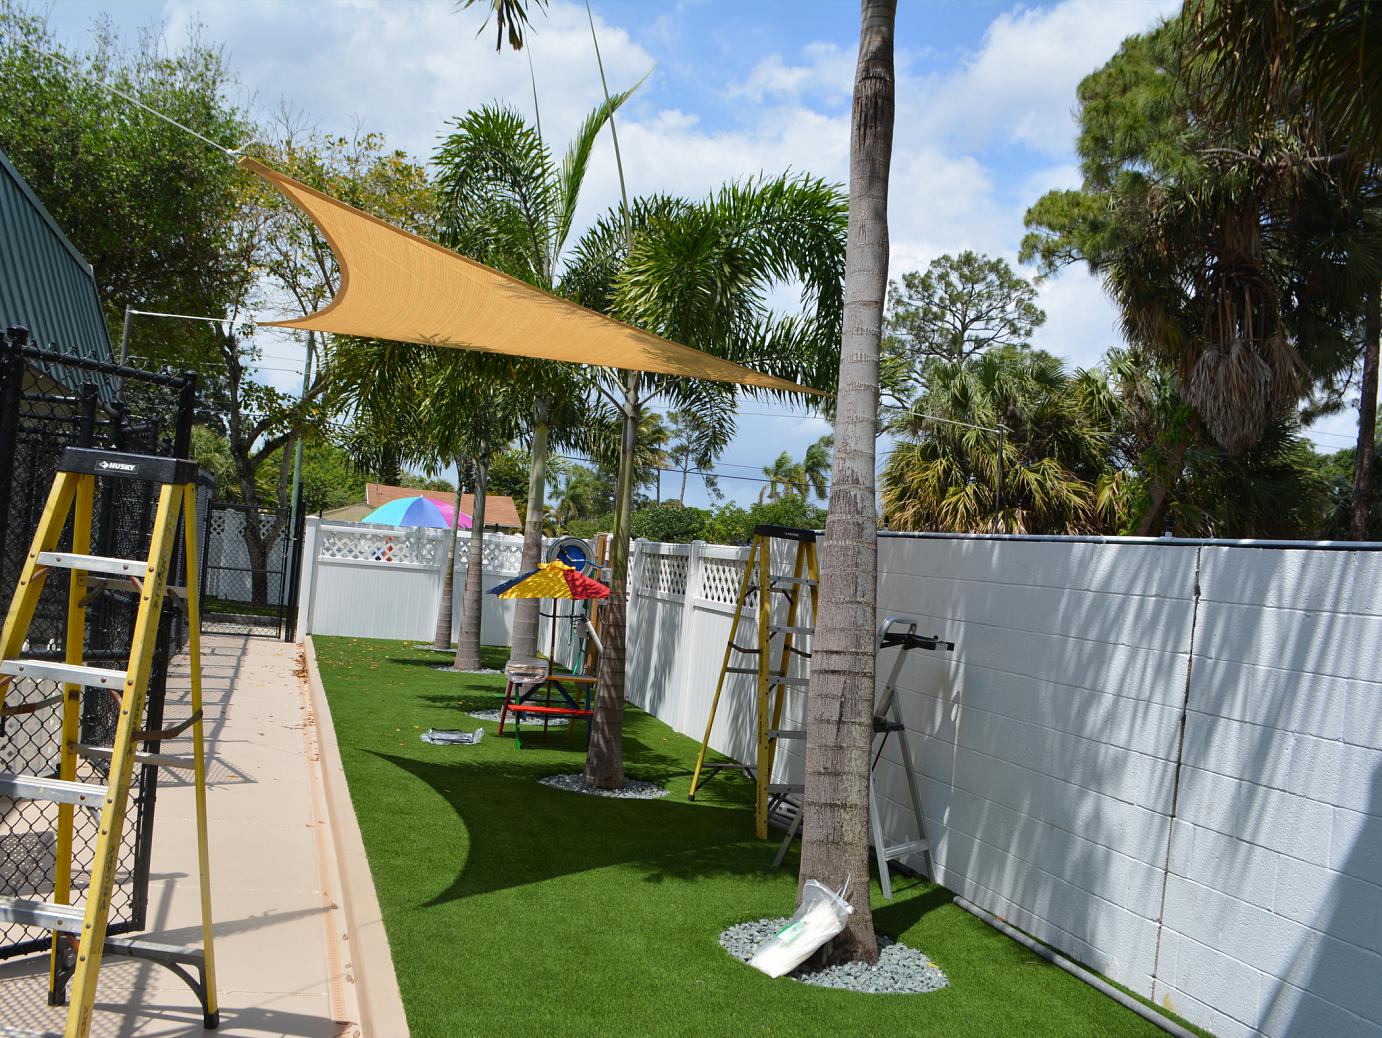 Artificial Grass: Grass Turf Fairfield, Texas Hotel For Dogs, Commercial Landscape